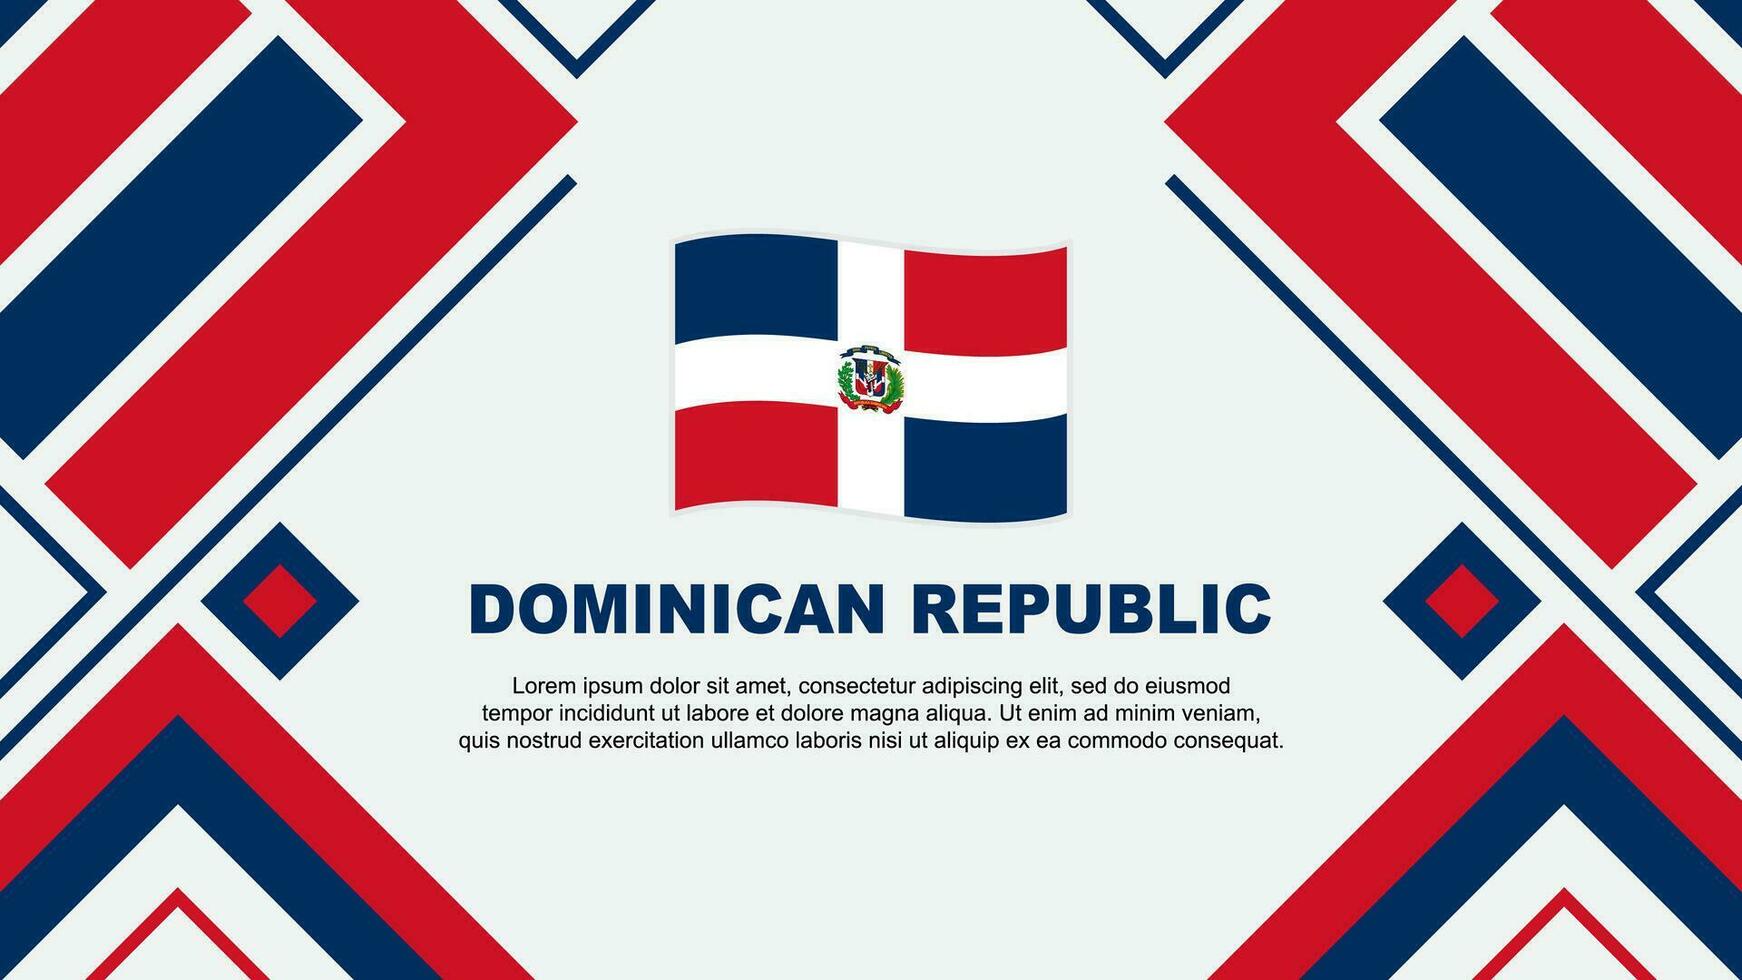 Dominican Republic Flag Abstract Background Design Template. Dominican Republic Independence Day Banner Wallpaper Vector Illustration. Dominican Republic Flag